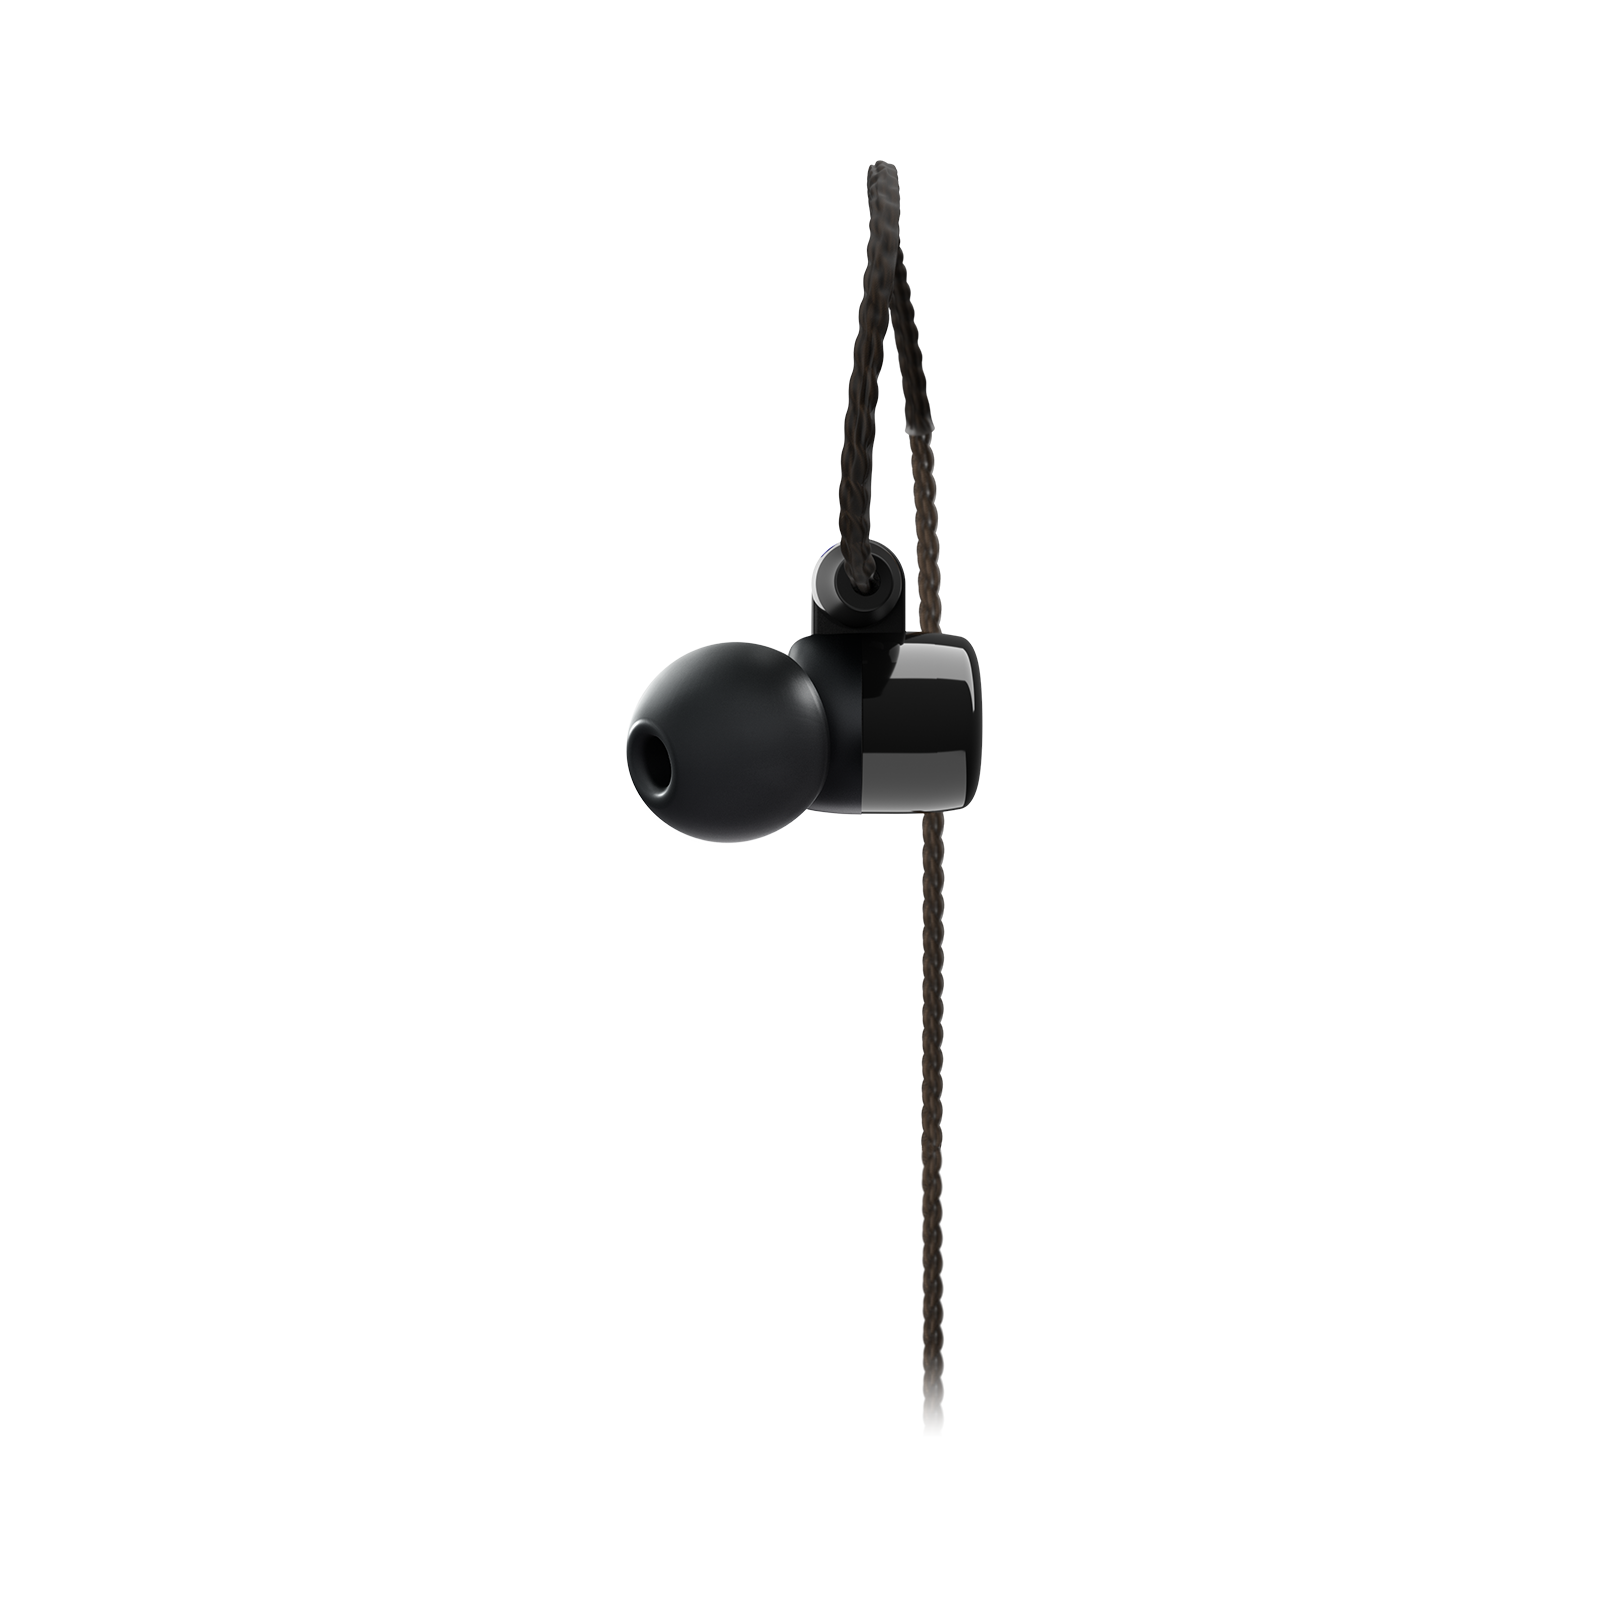 AKG N5005 - Black - Reference Class 5-driver configuration in-ear headphones with customizable sound - Detailshot 3